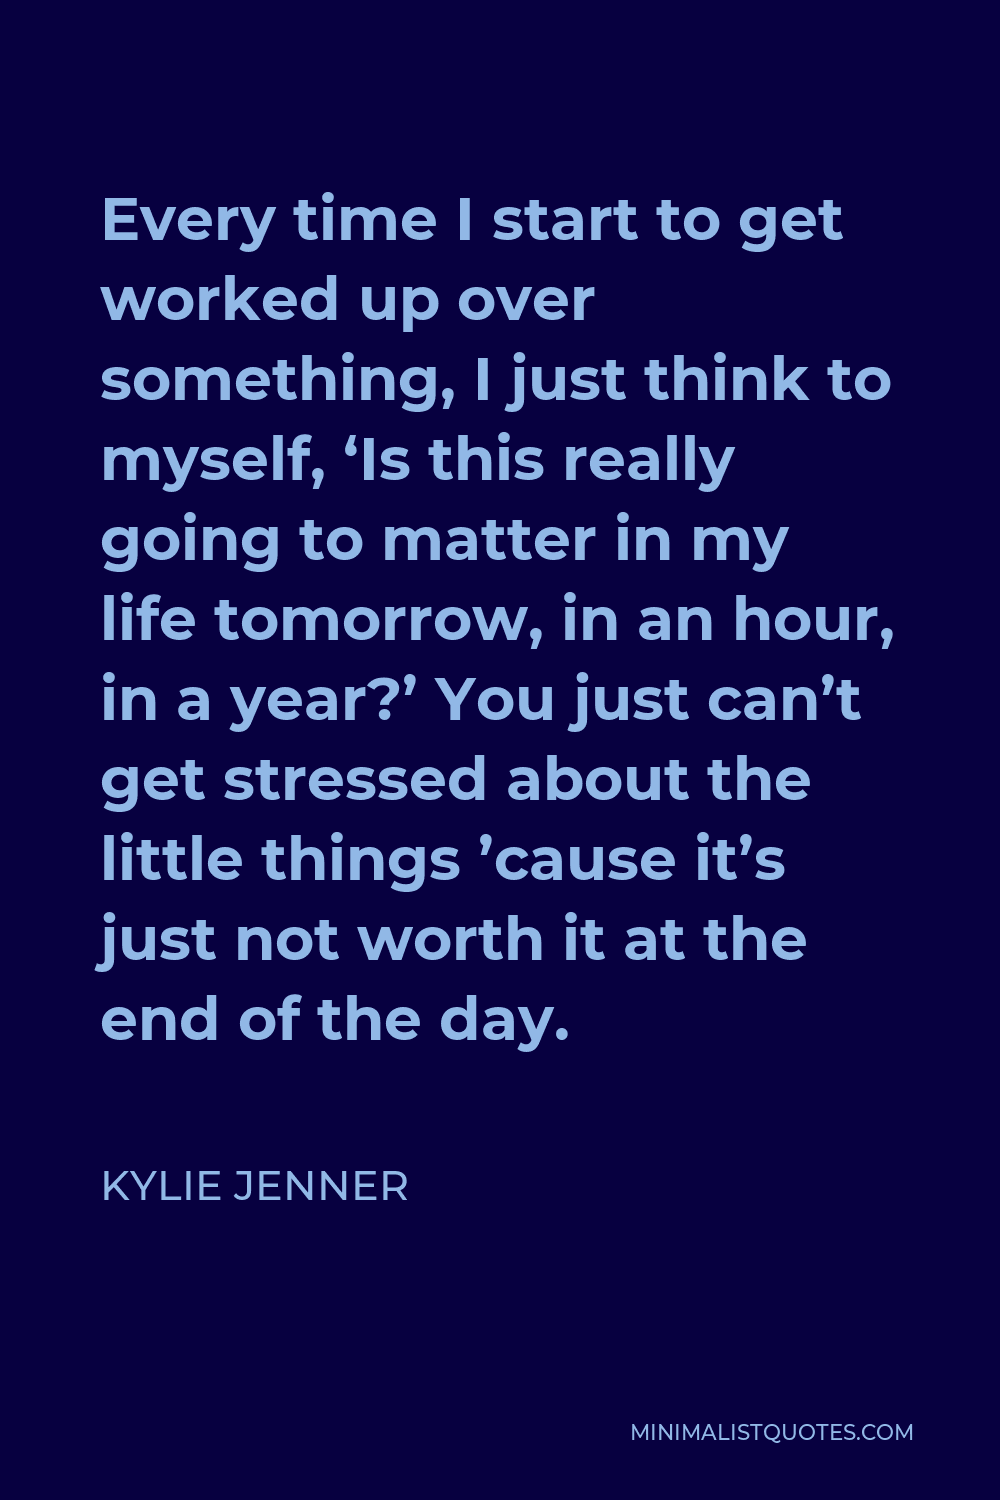 Kylie Jenner Quote - Every time I start to get worked up over something, I just think to myself, ‘Is this really going to matter in my life tomorrow, in an hour, in a year?’ You just can’t get stressed about the little things ’cause it’s just not worth it at the end of the day.